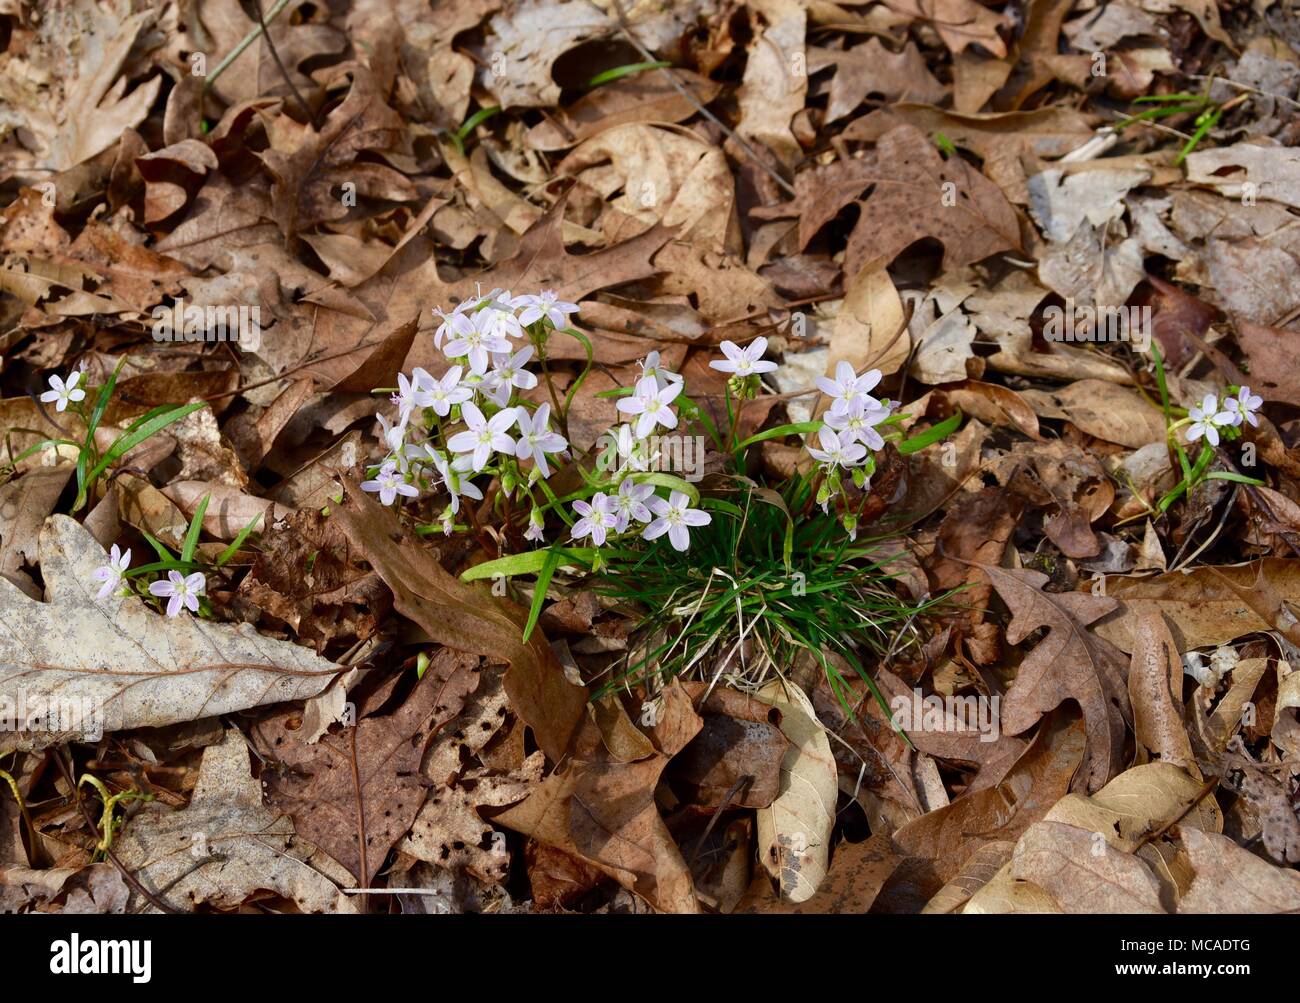 A bouquet of pink and white spring beauty flowers with green leaves emerging in a spring forest. Stock Photo